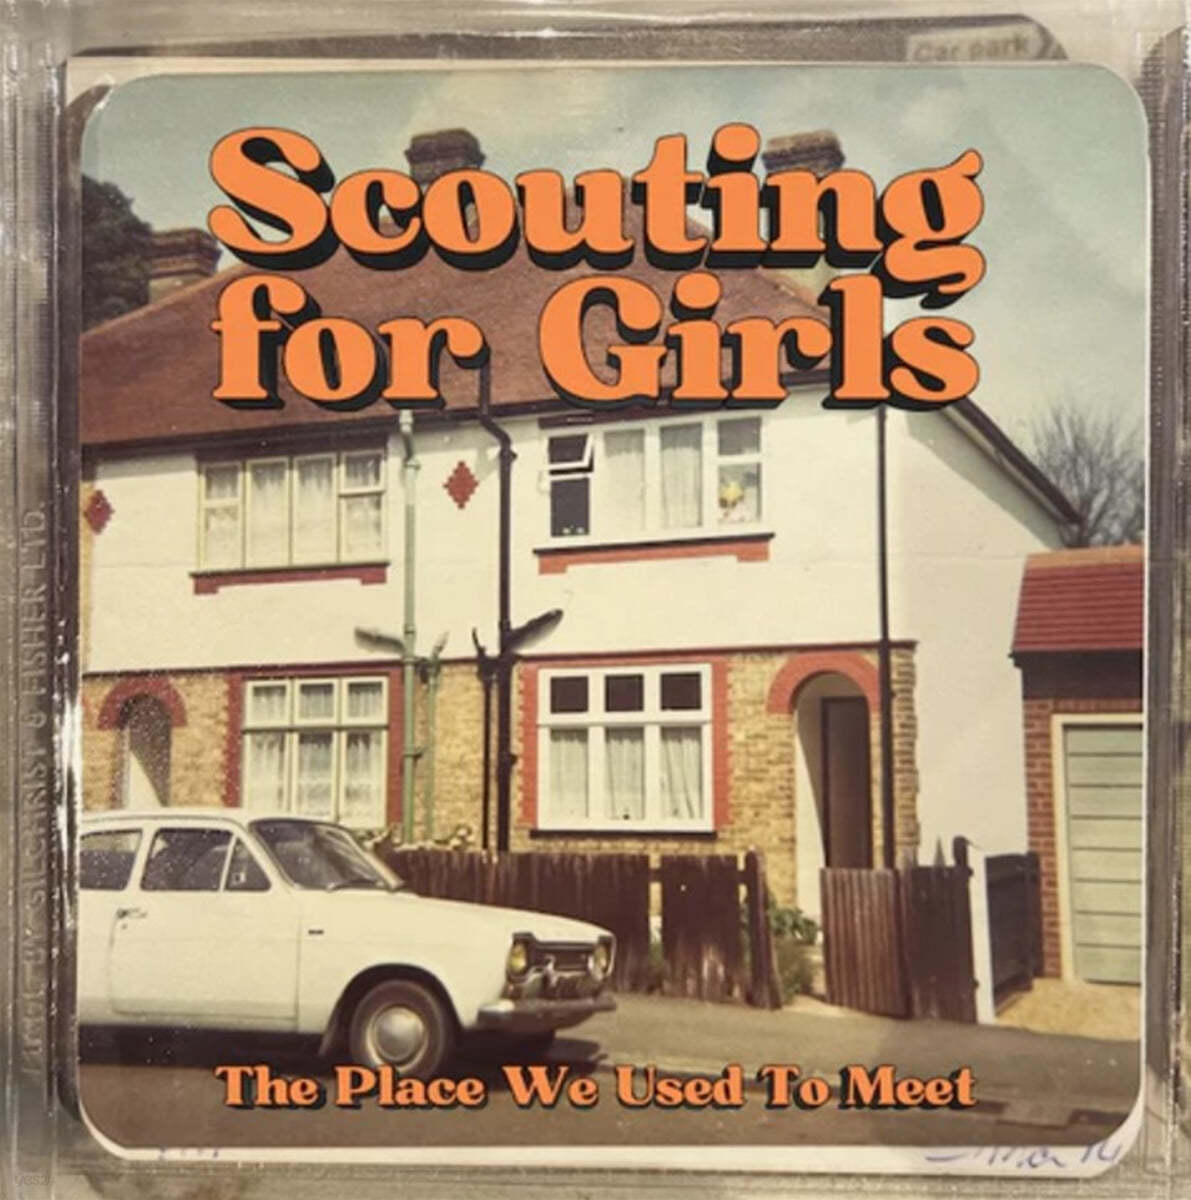 Scouting For Girls (스카우팅 포 걸스) - The Place We Used to Meet [LP]